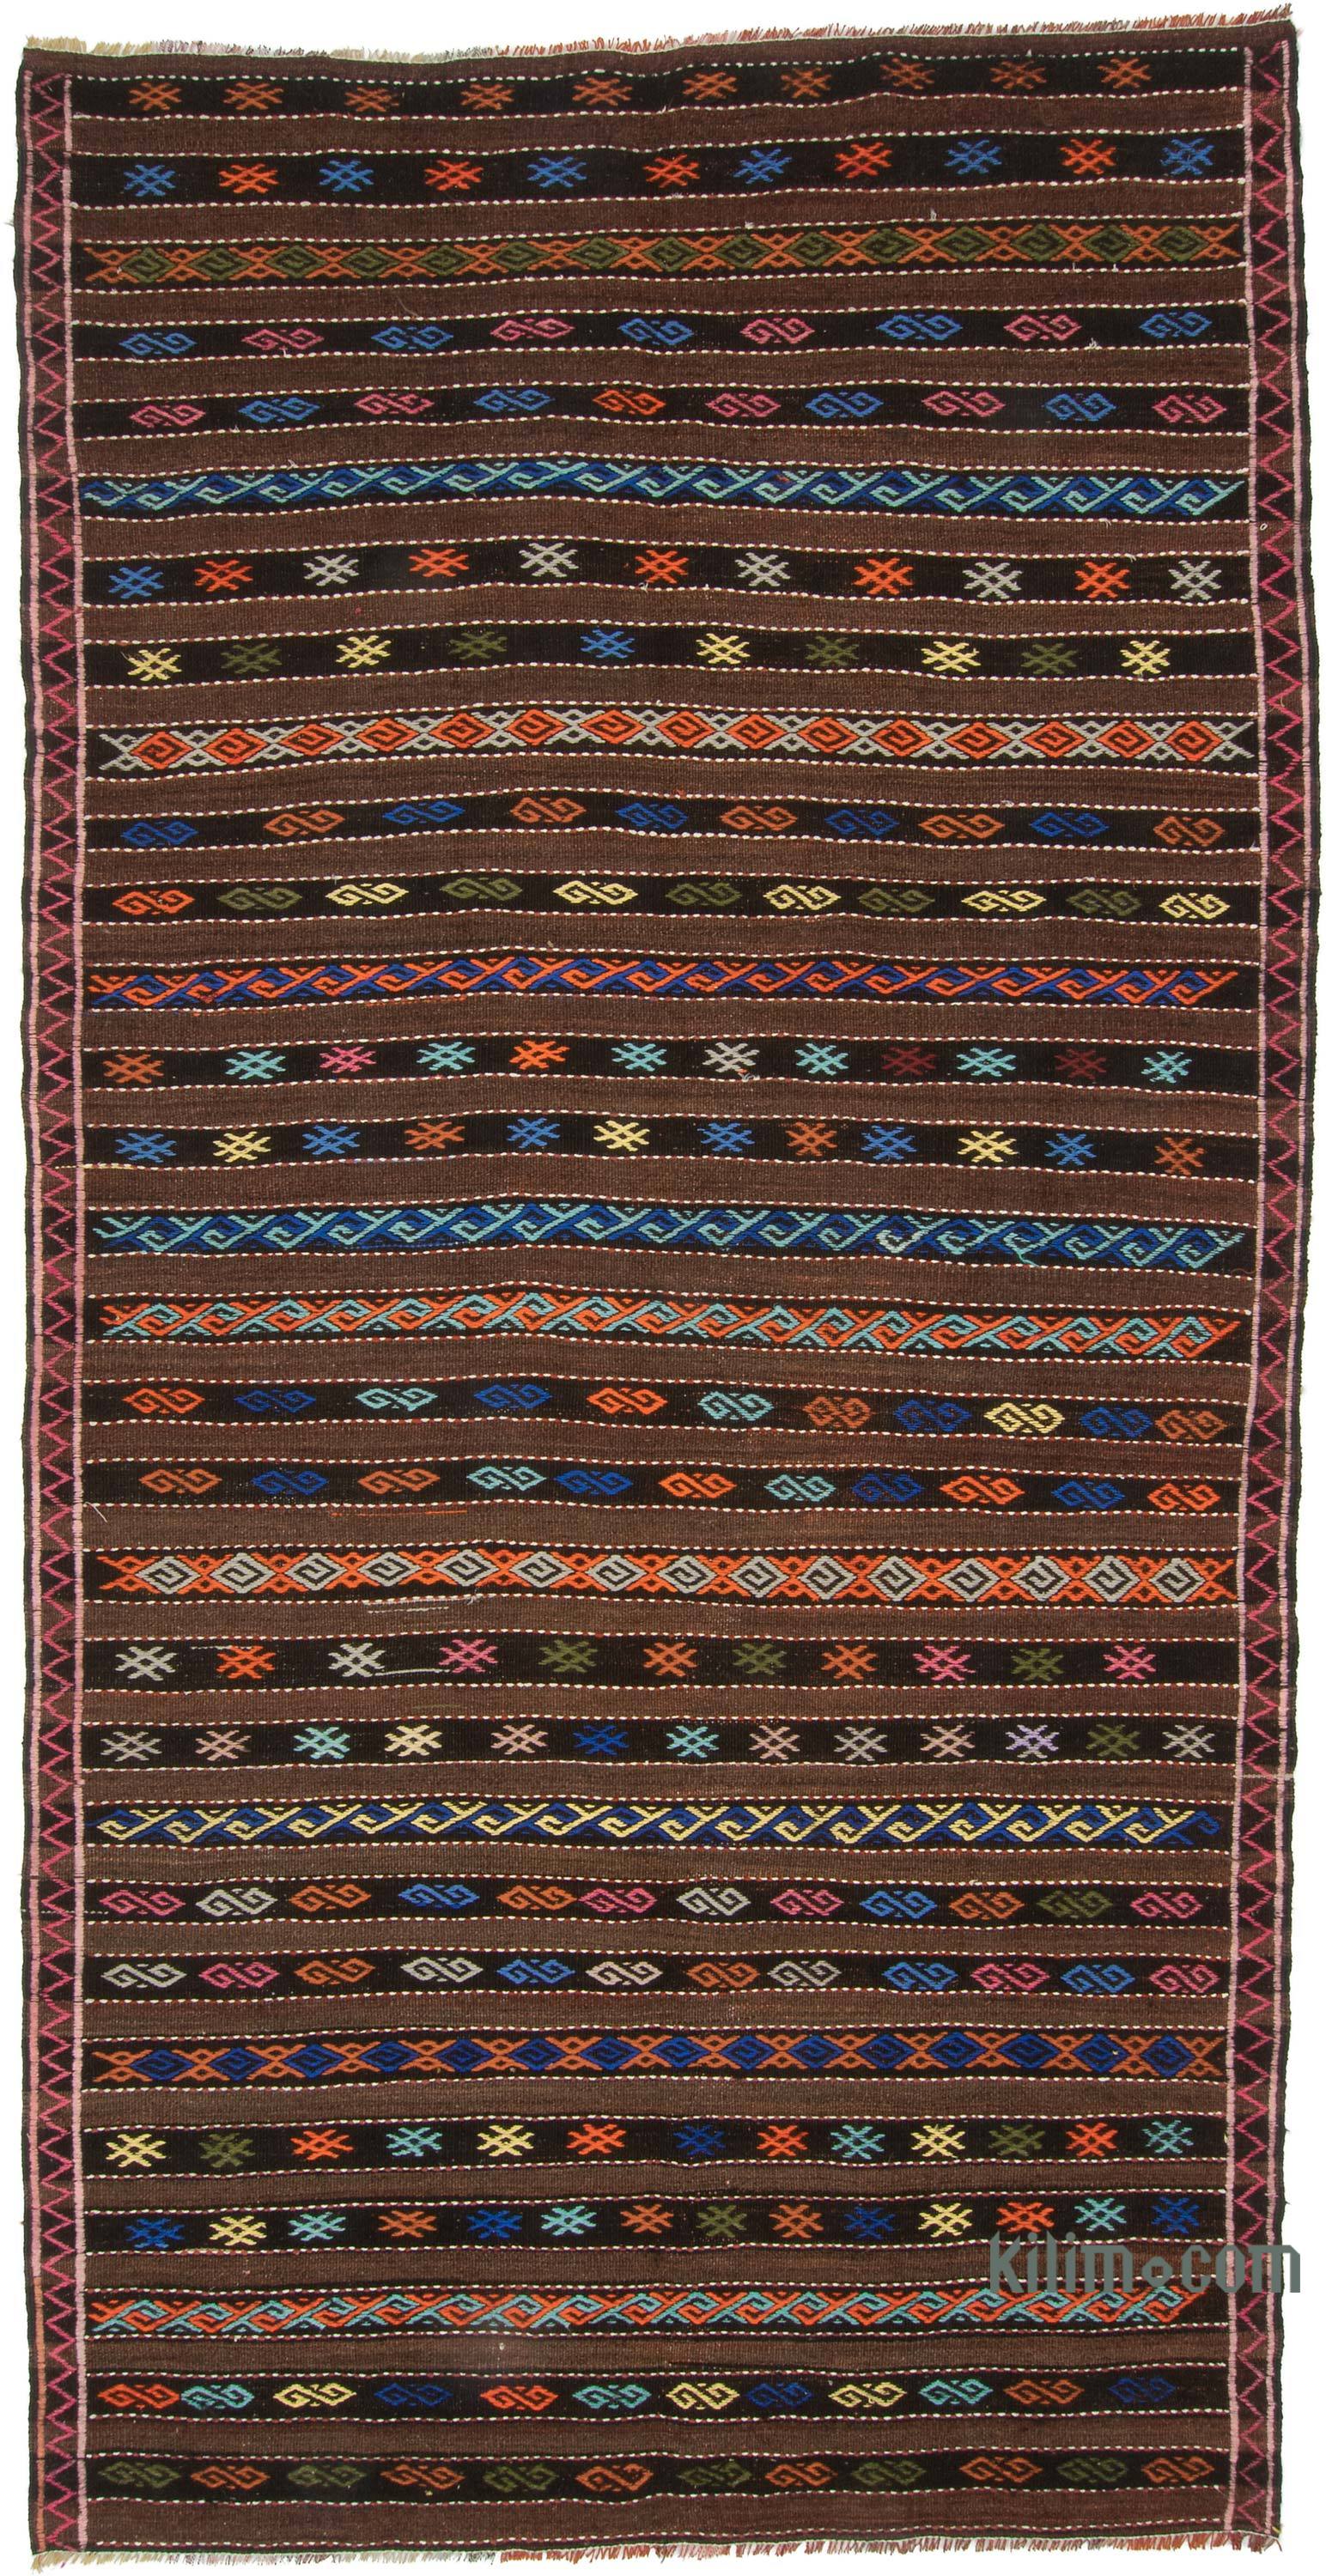 K0061907 Vintage Anatolian Kilim Rug - 7' 7 x 9' (91 x 108)  The Source  for Vintage Rugs, Tribal Kilim Rugs, Wool Turkish Rugs, Overdyed Persian  Rugs, Runner Rugs, Patchwork Rugs